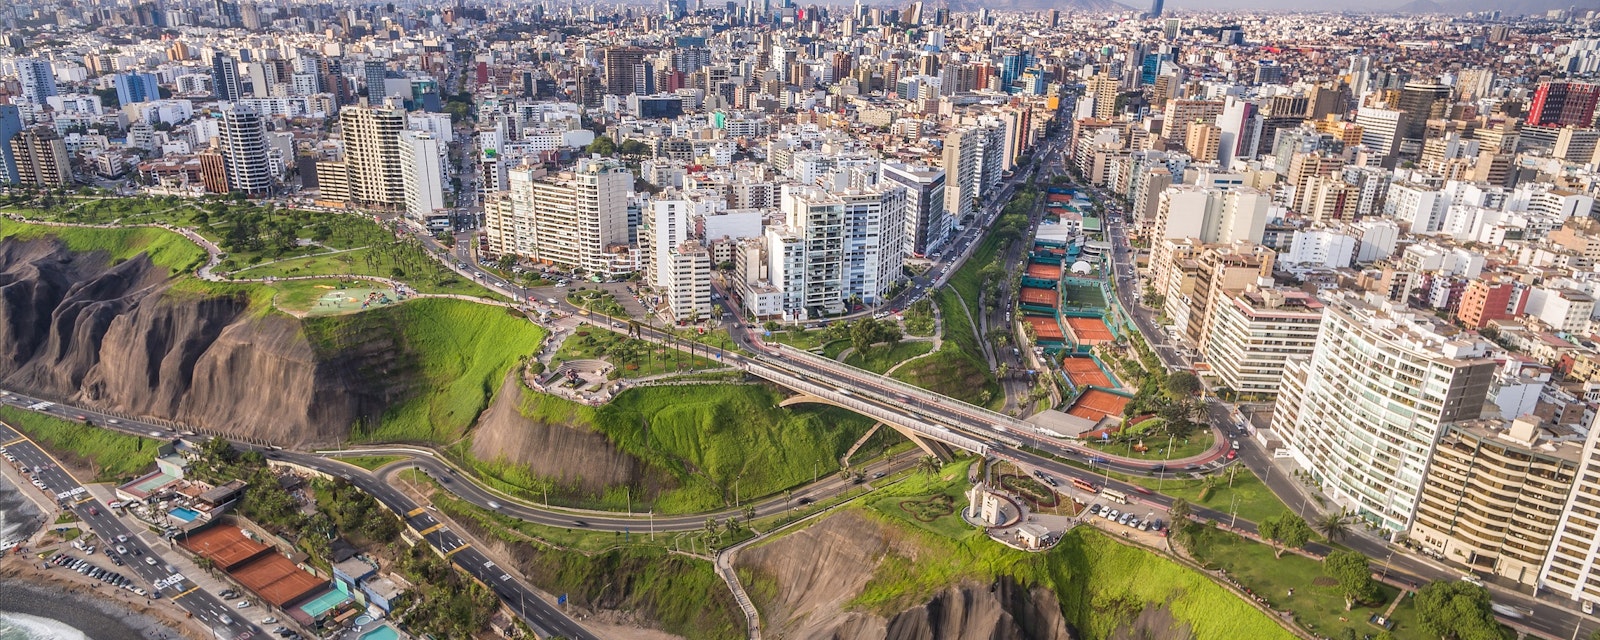 Panoramic,Aerial,View,Of,Miraflores,Town,And,Lima,City,At